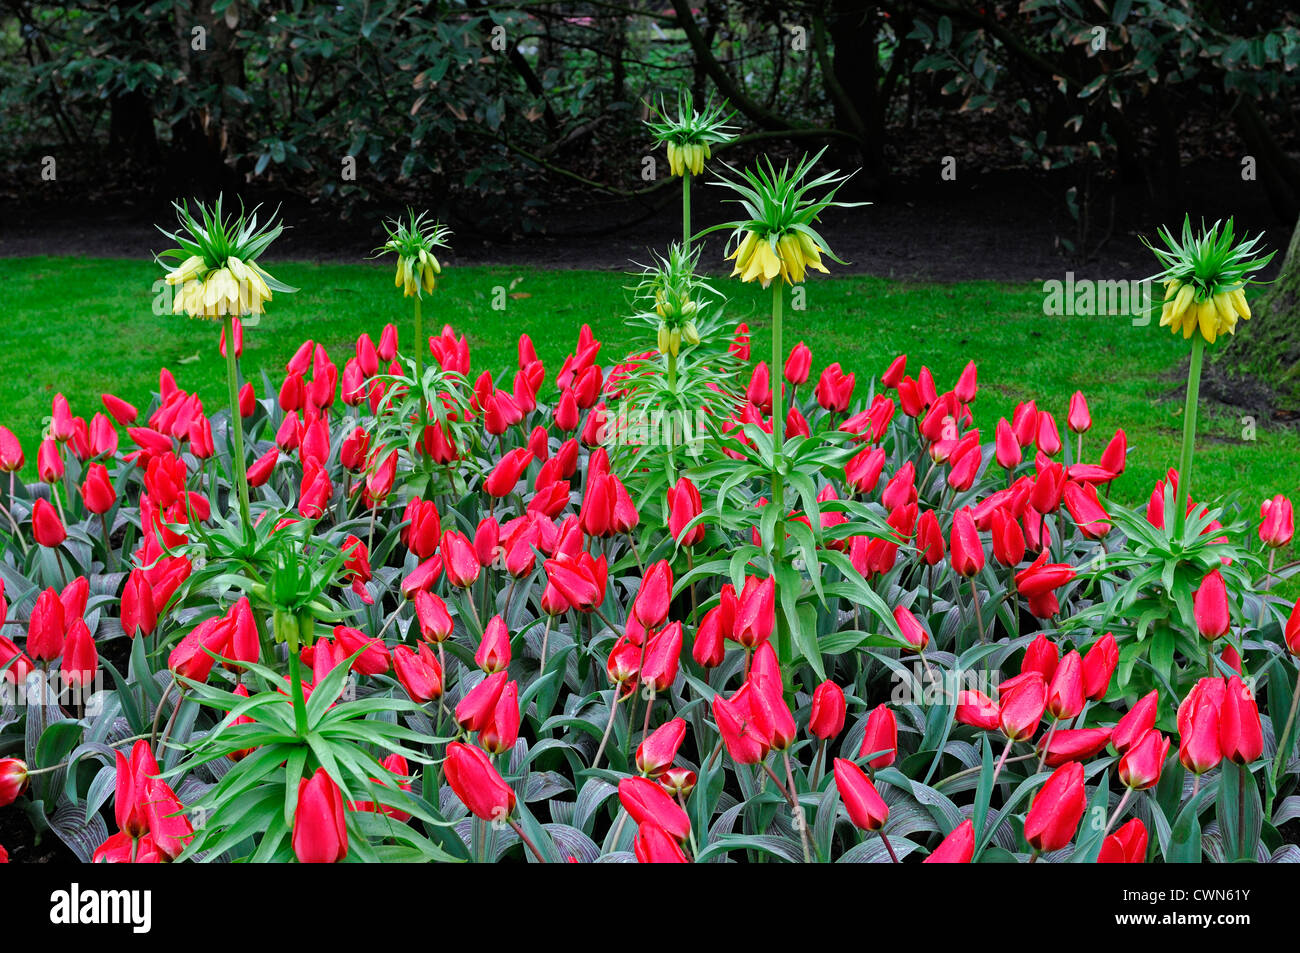 Tulipa red riding hood greigii tulip flowers fritillaria imperialis lutea yellow display spring flower mixed bed combination Stock Photo